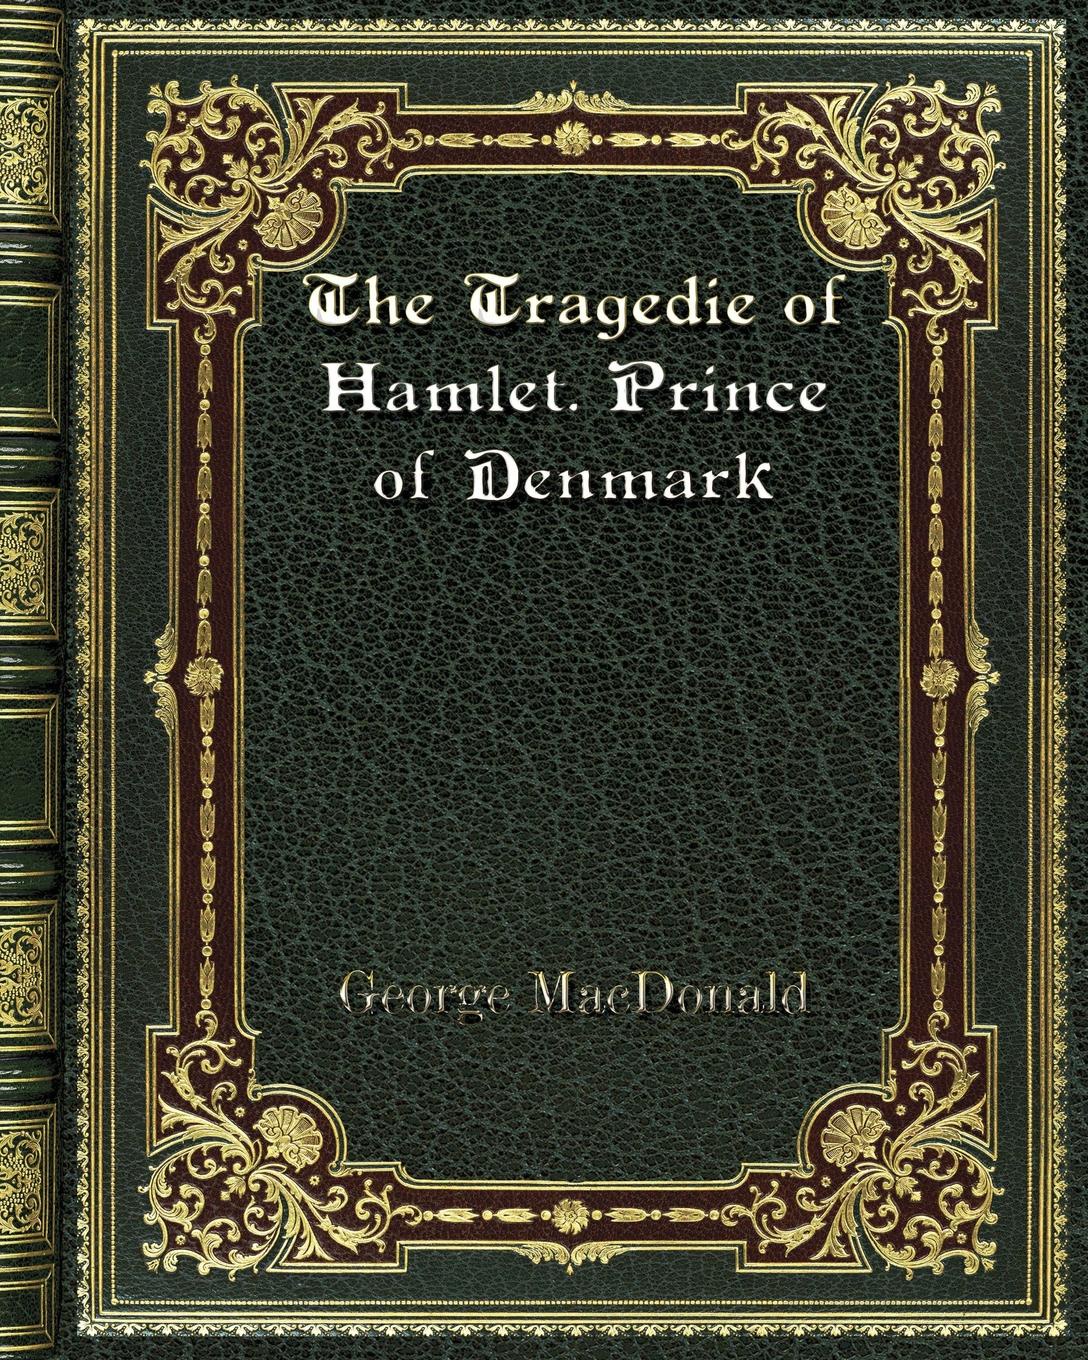 The Tragedie of Hamlet. Prince of Denmark